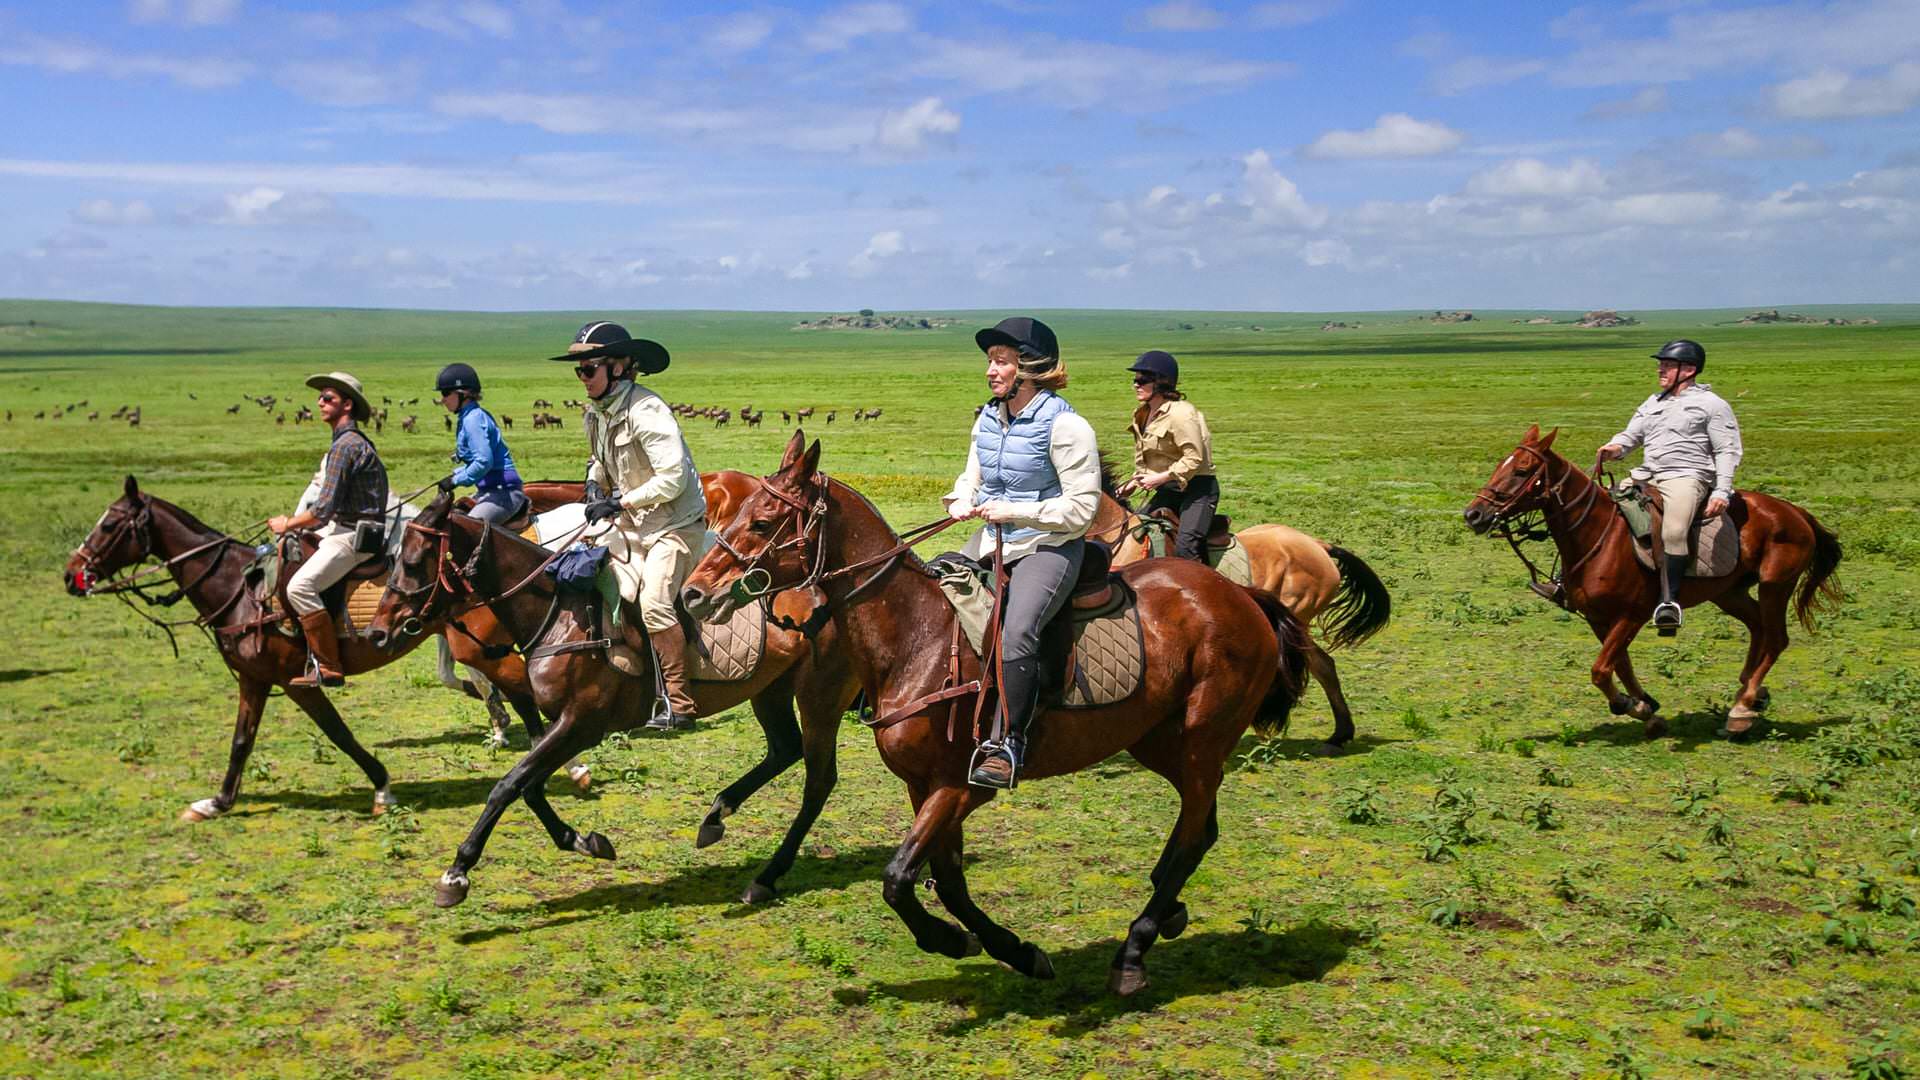 Horses and riders with Wildebeest